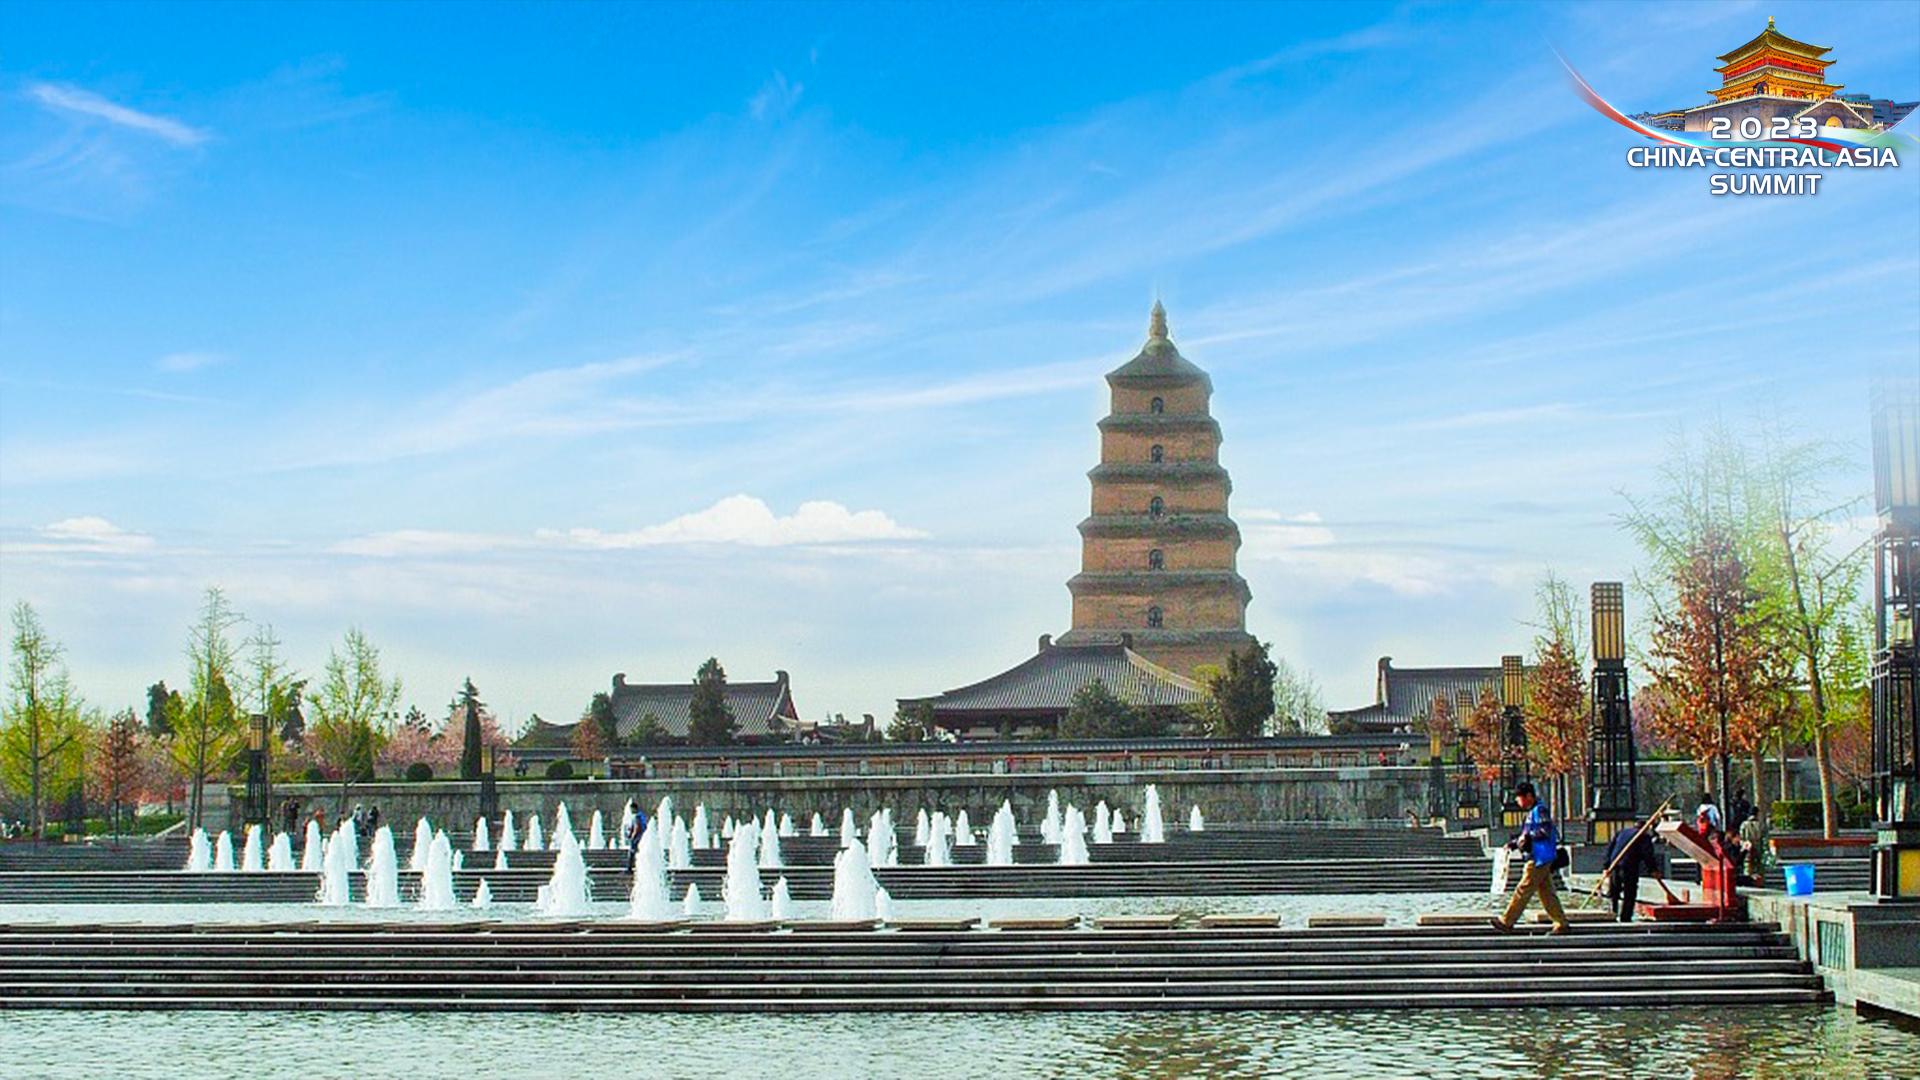 Live: Tour of the Greater Wild Goose Pagoda in Xian City – Ep. 4